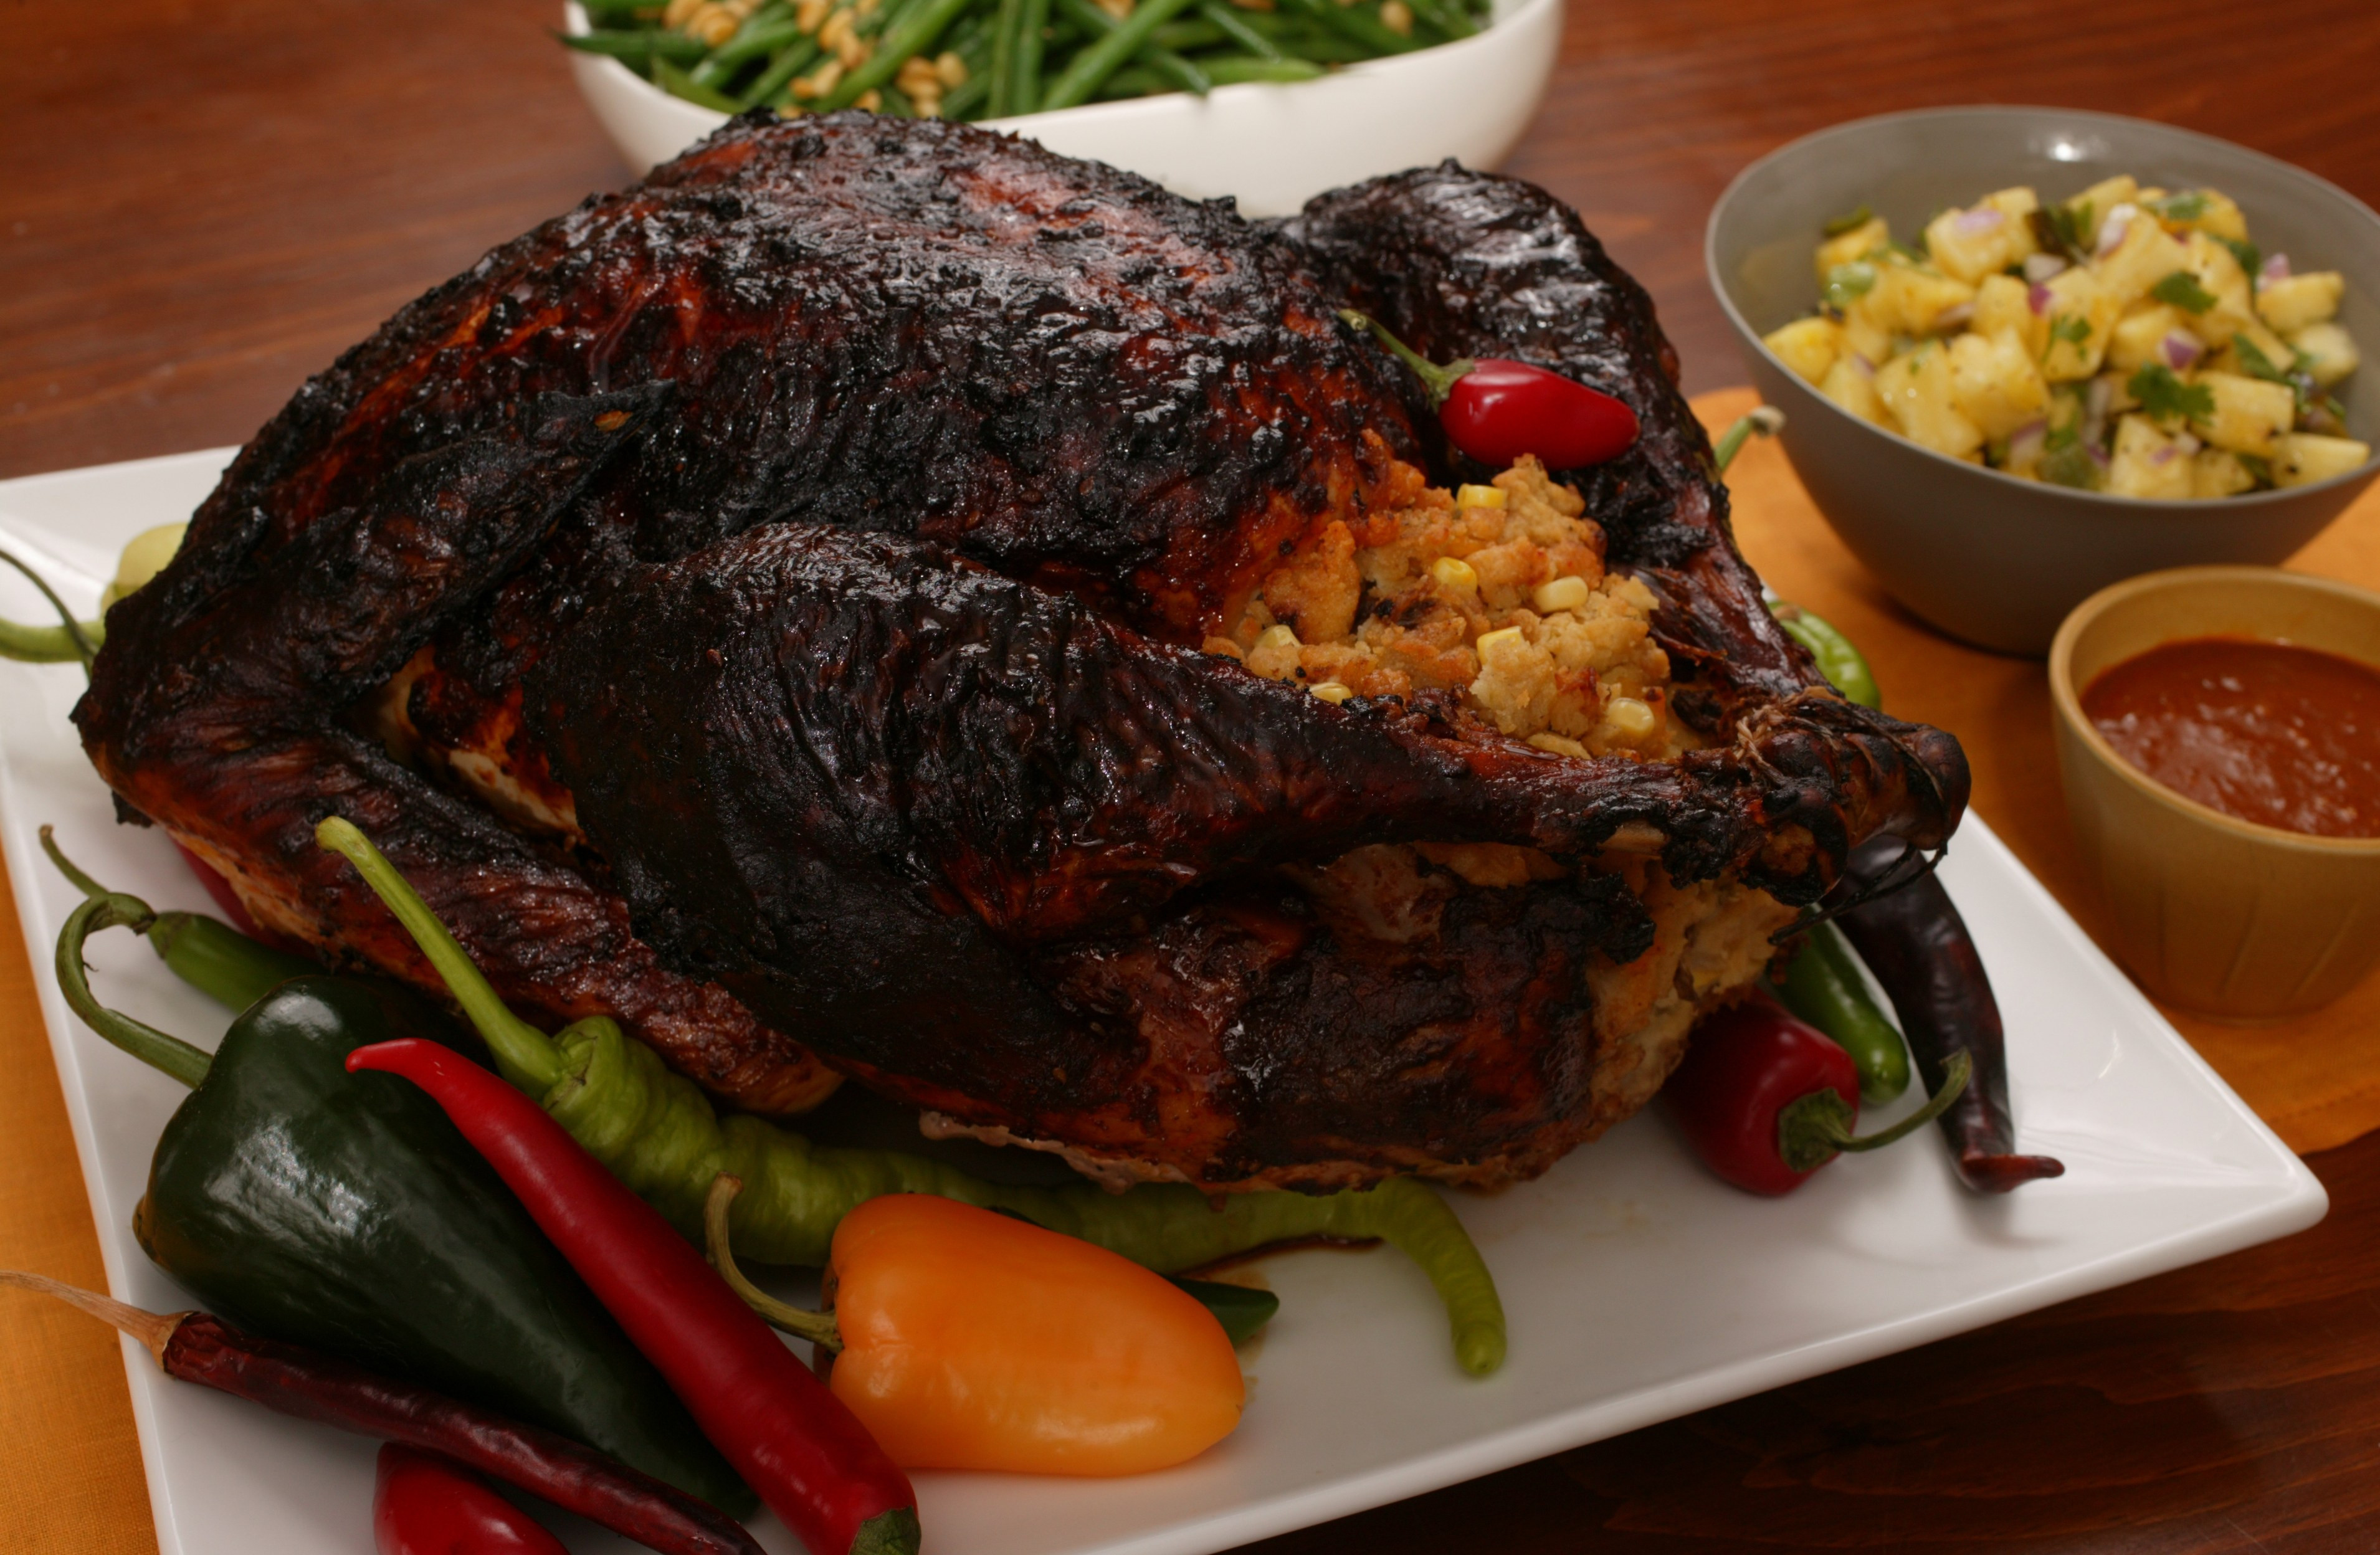 Recipes For Thanksgiving Turkey
 Mole Roasted Turkey with Masa Stuffing and Chile Gravy